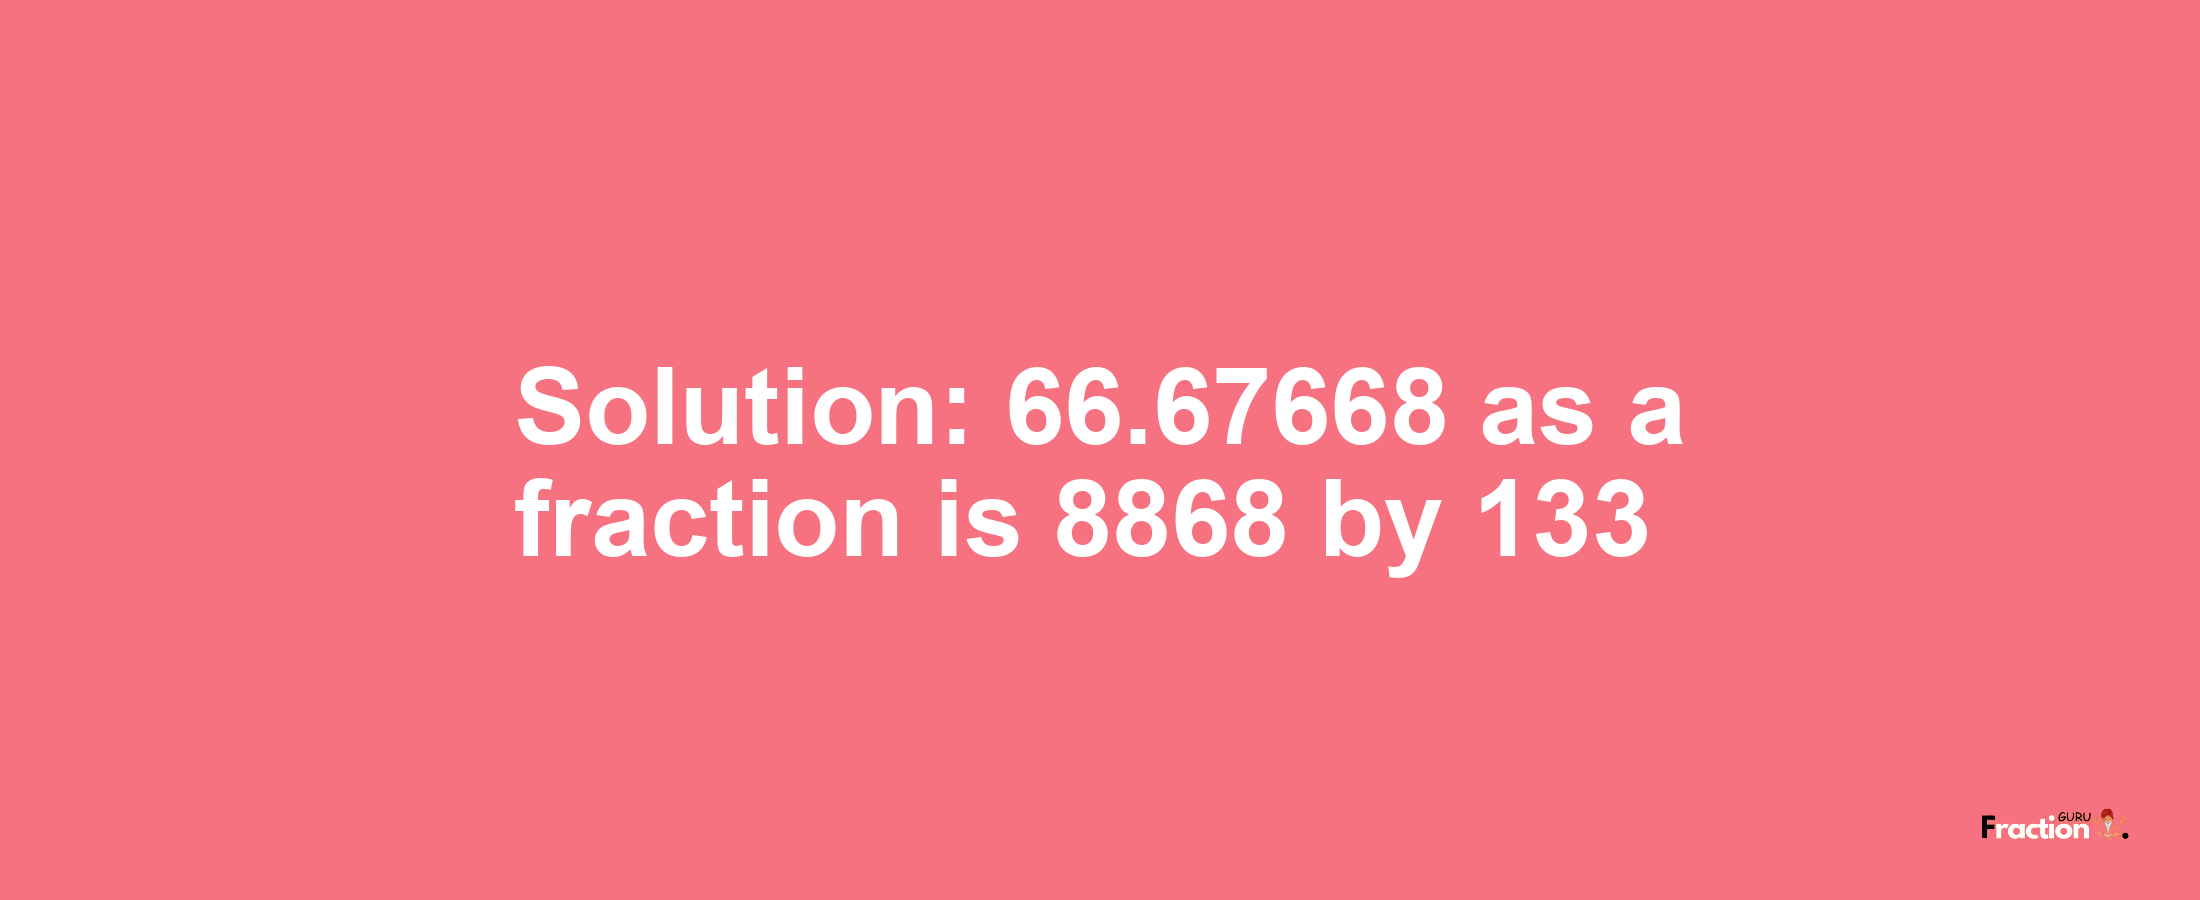 Solution:66.67668 as a fraction is 8868/133